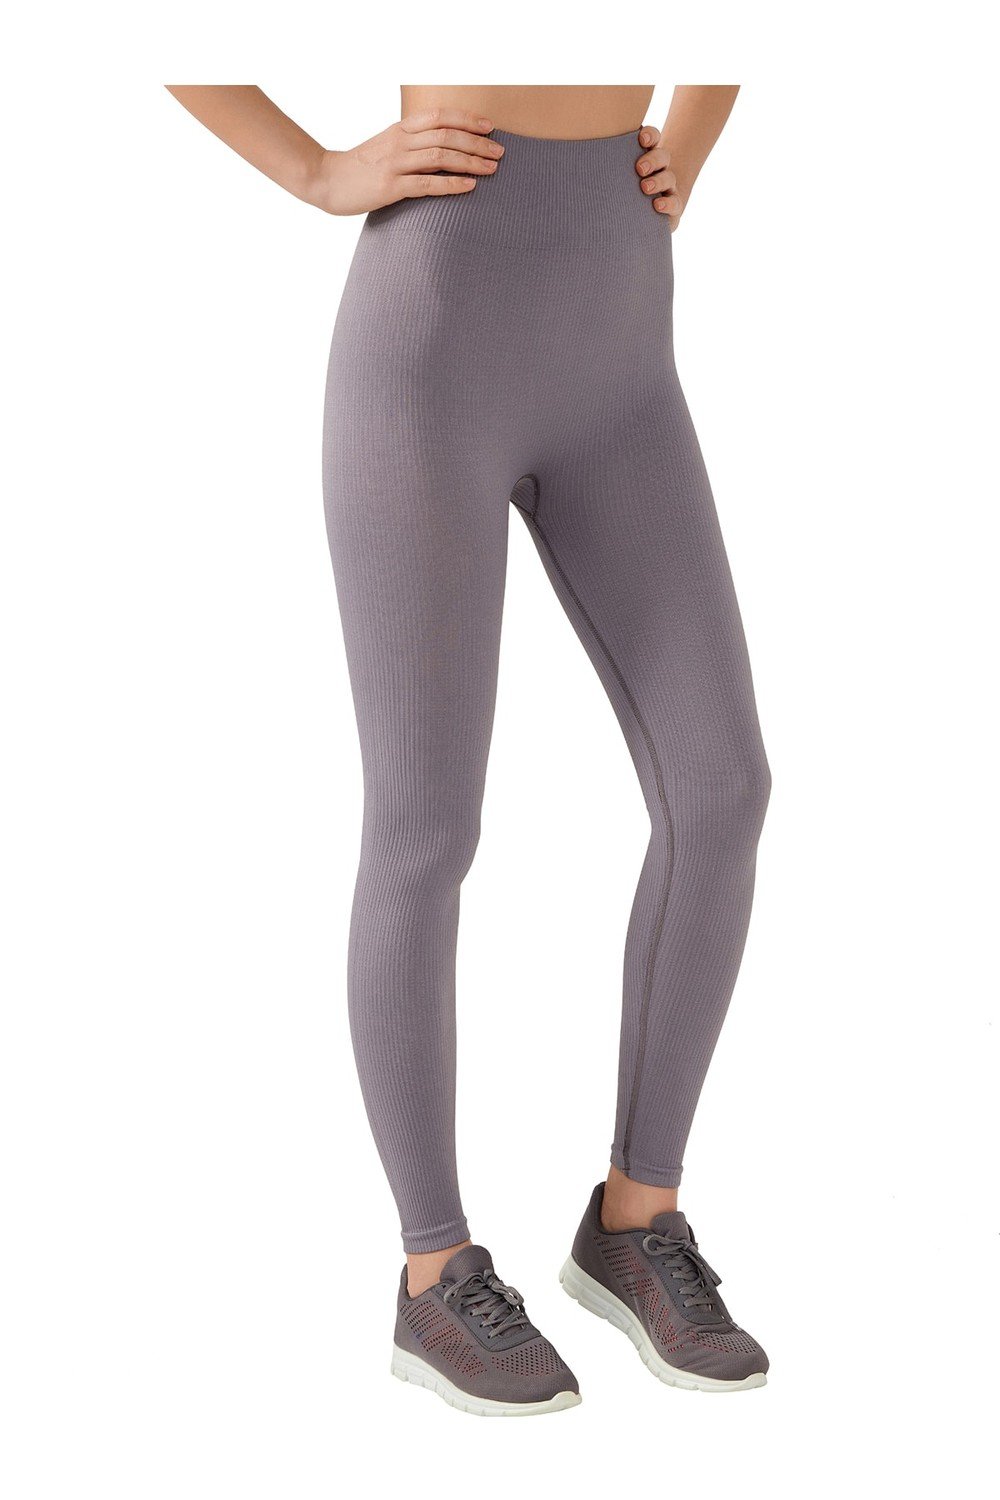 LOS OJOS Women's Anthracite High Waist Seamless Ribbons Contouring Sports Leggings.